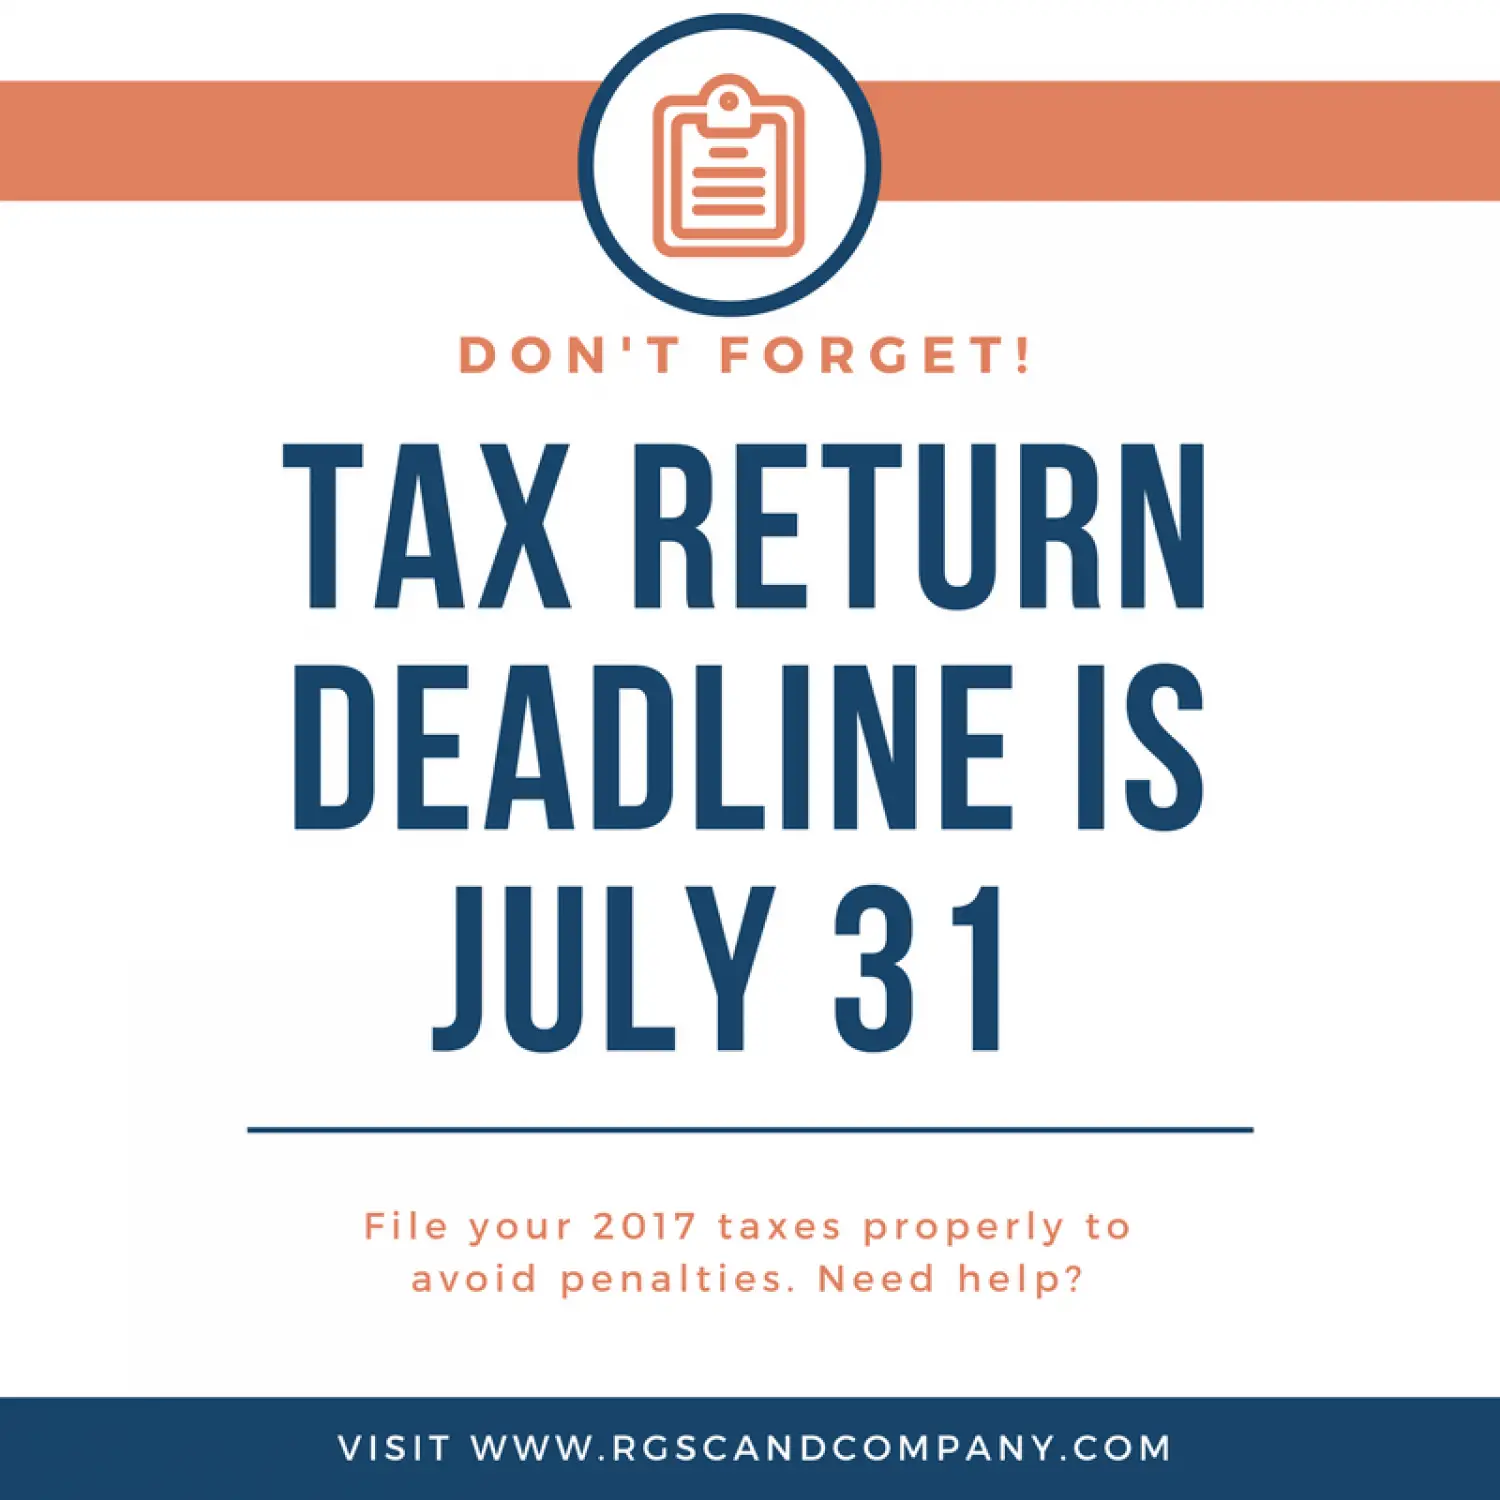 Has The Deadline For Estimated Taxes Been Extended